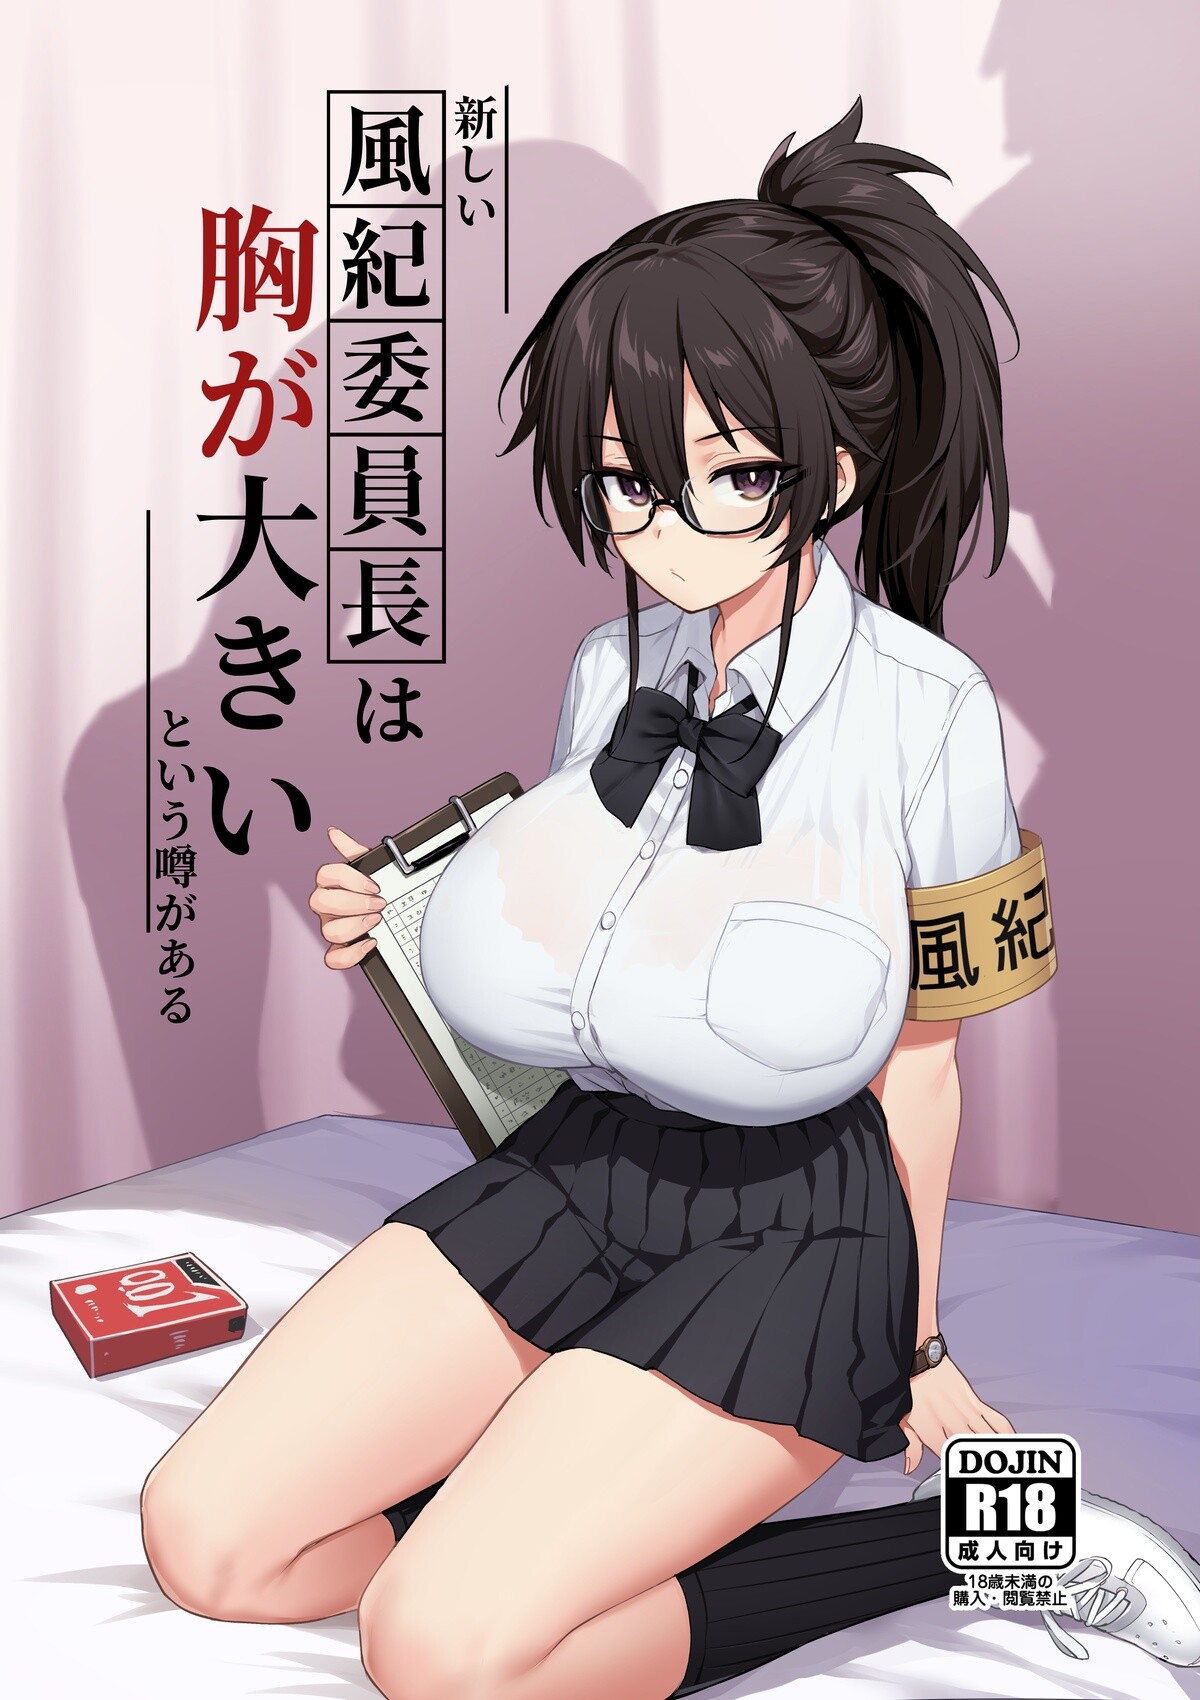 Hentai Manga Comic-Rumor Has It That The New Chairman of Disciplinary Committee Has Huge Breasts.-Read-1